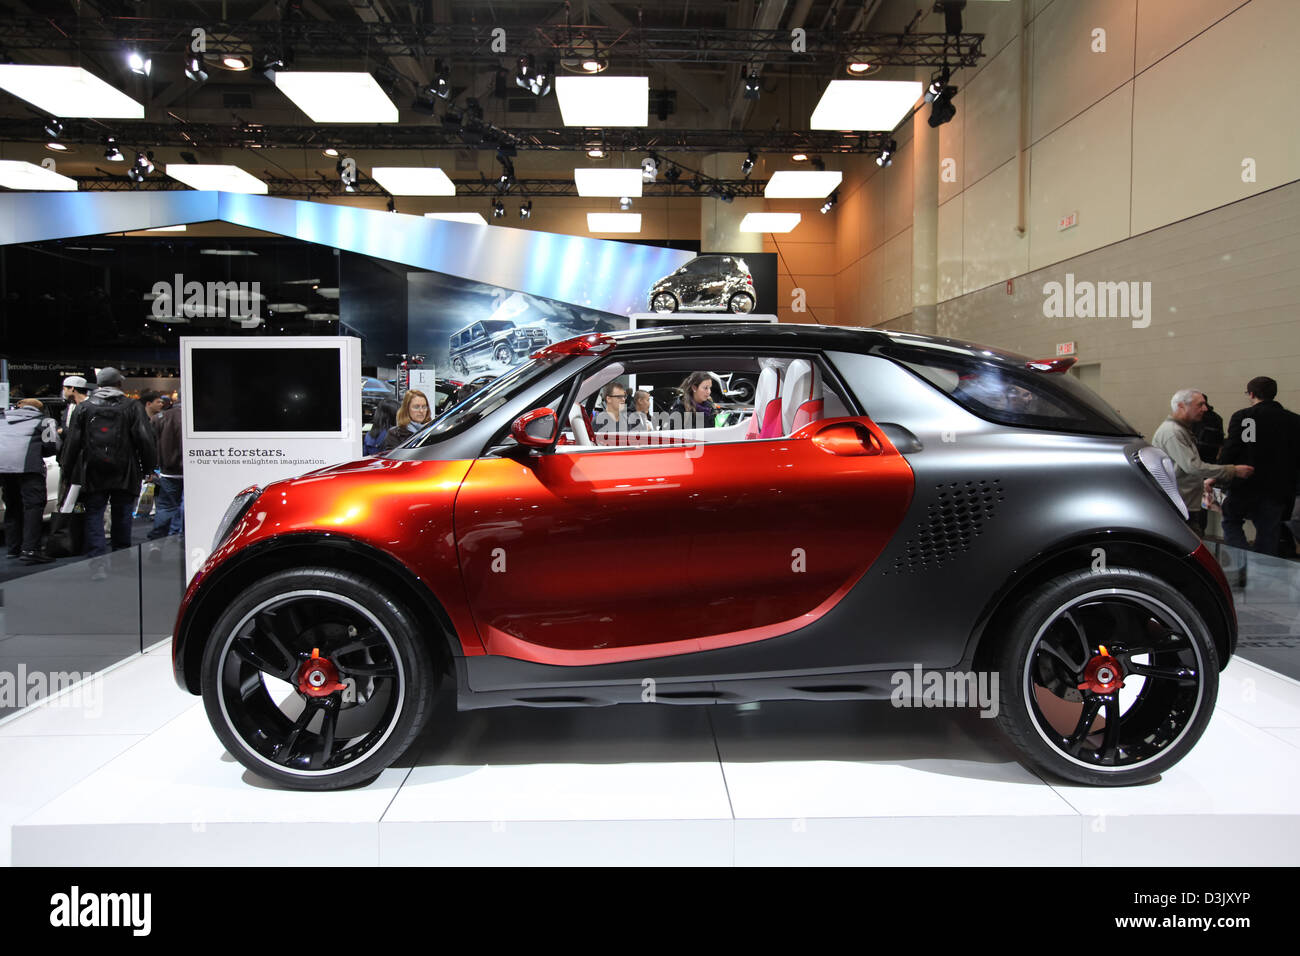 smart forstars electric concept side view Stock Photo